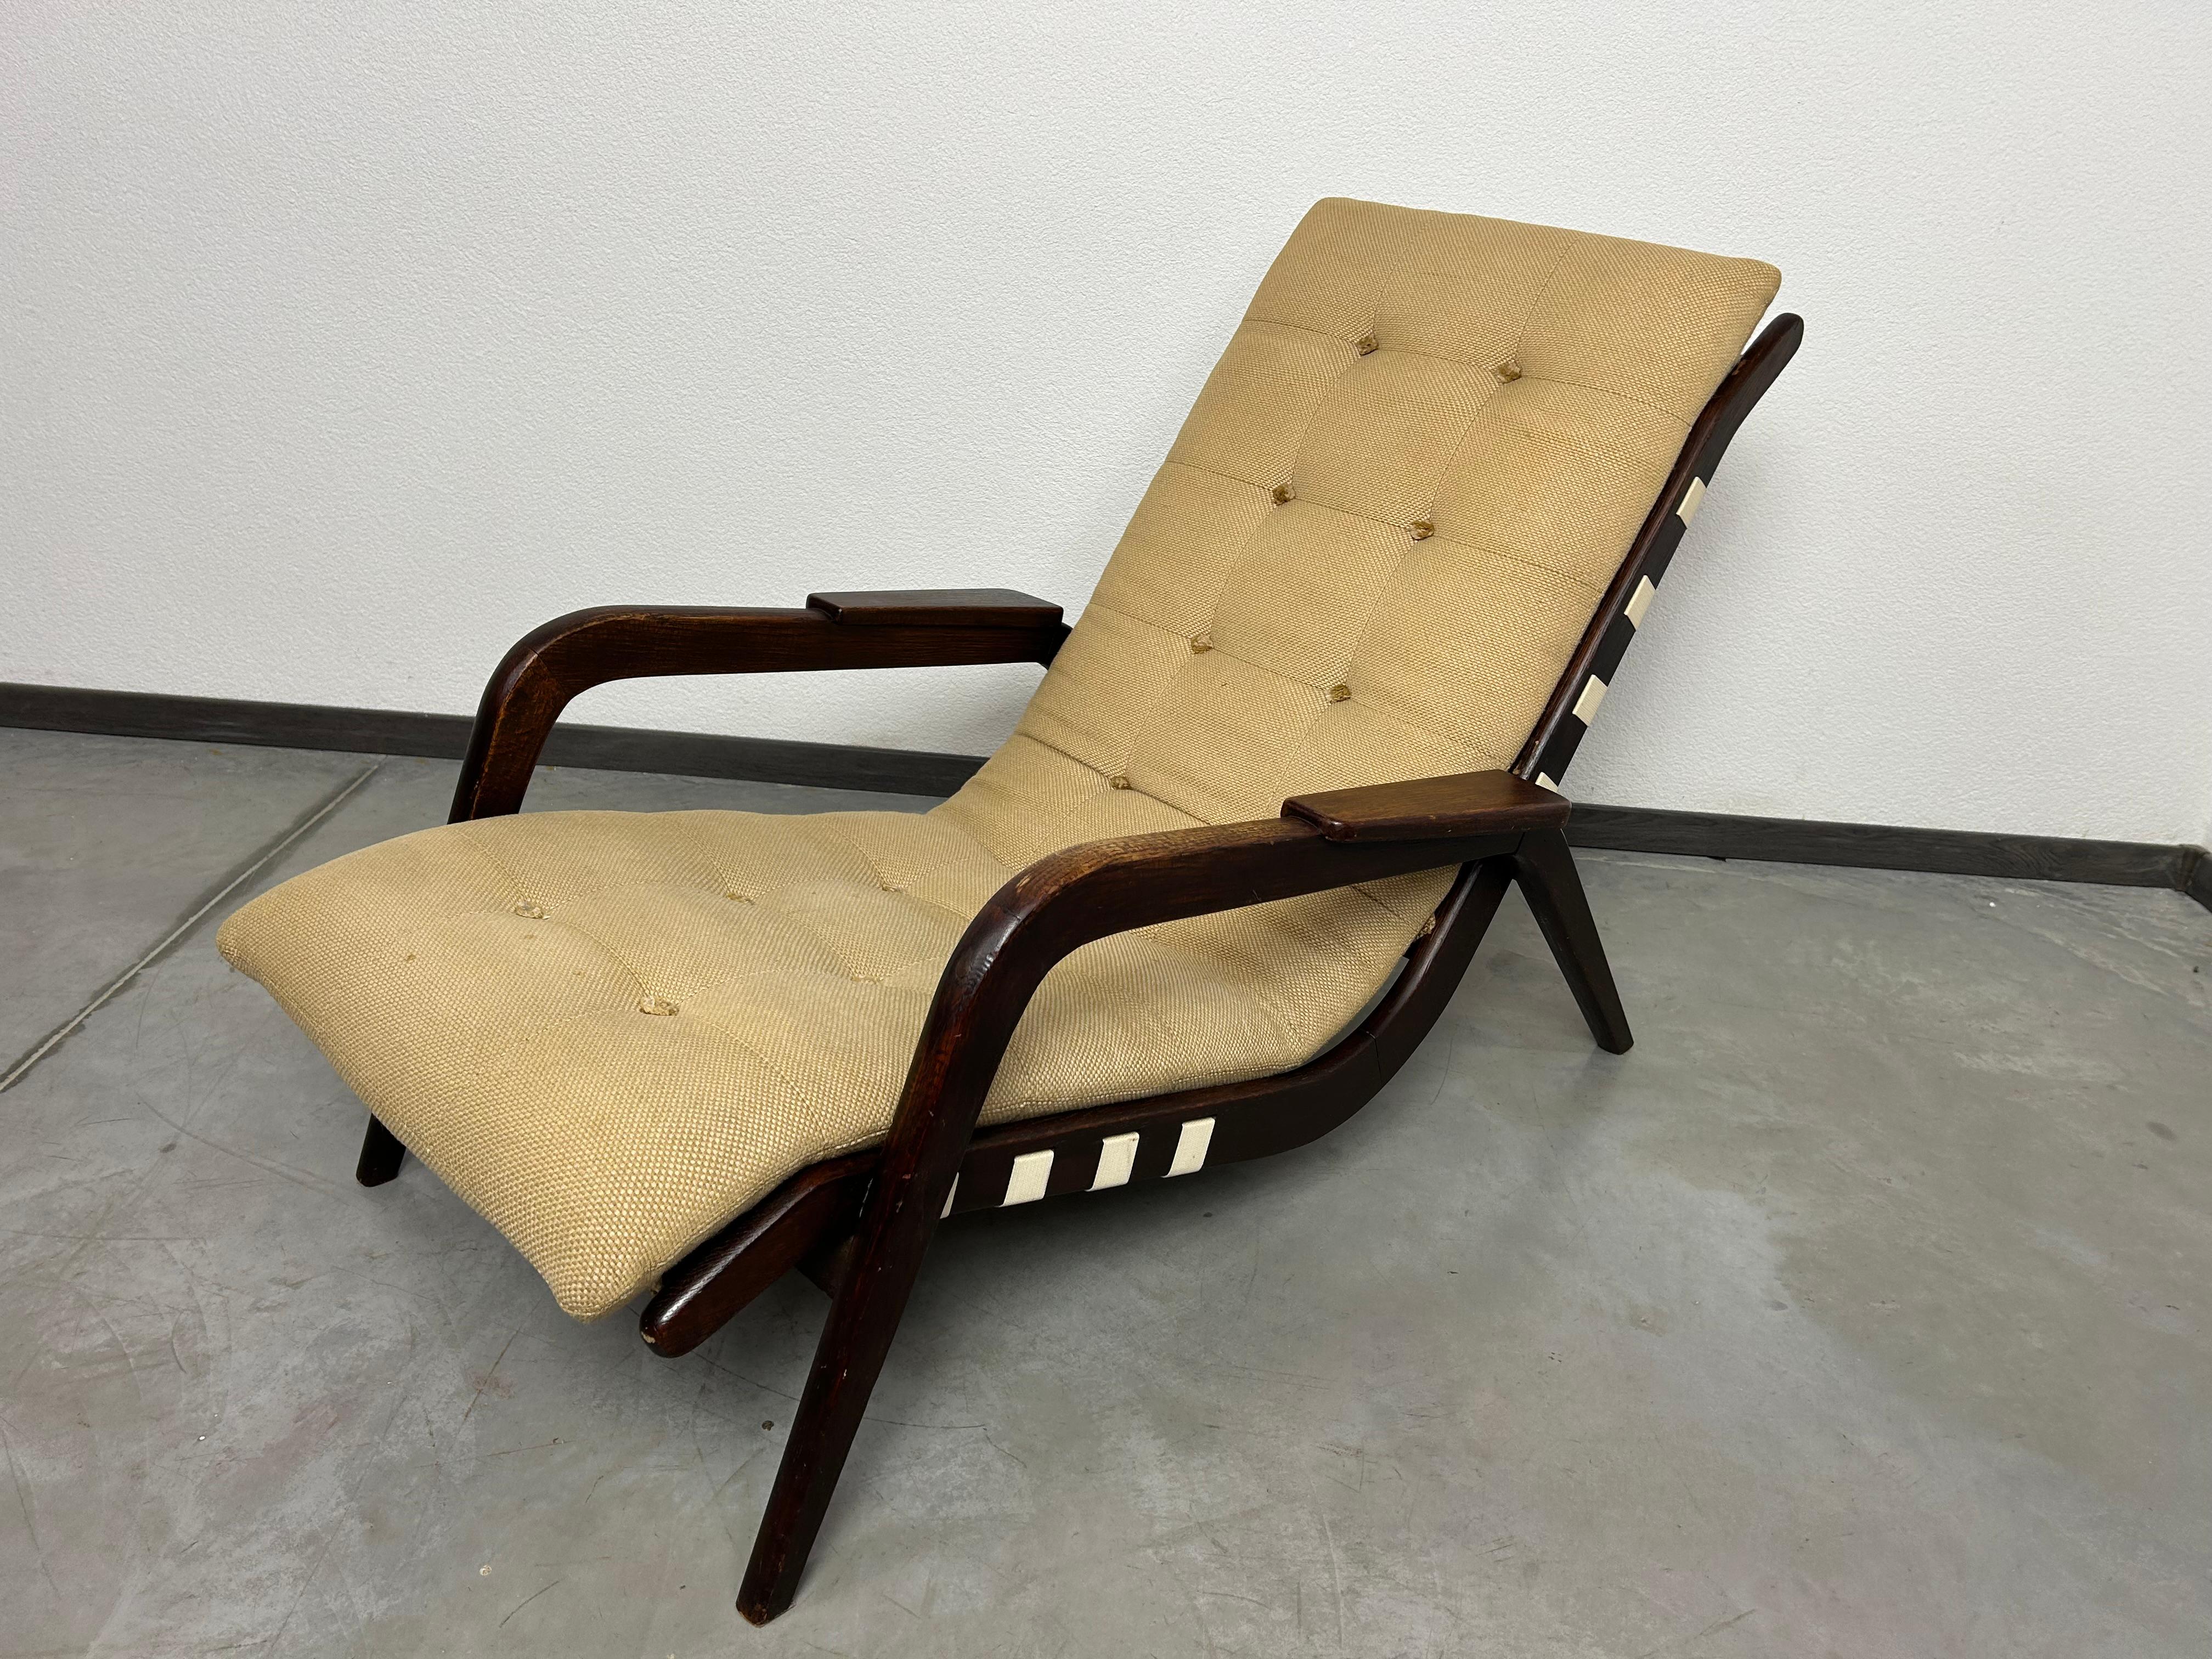 Art deco lounge chair by Jan Vaněk in very good original condition with signs of use.